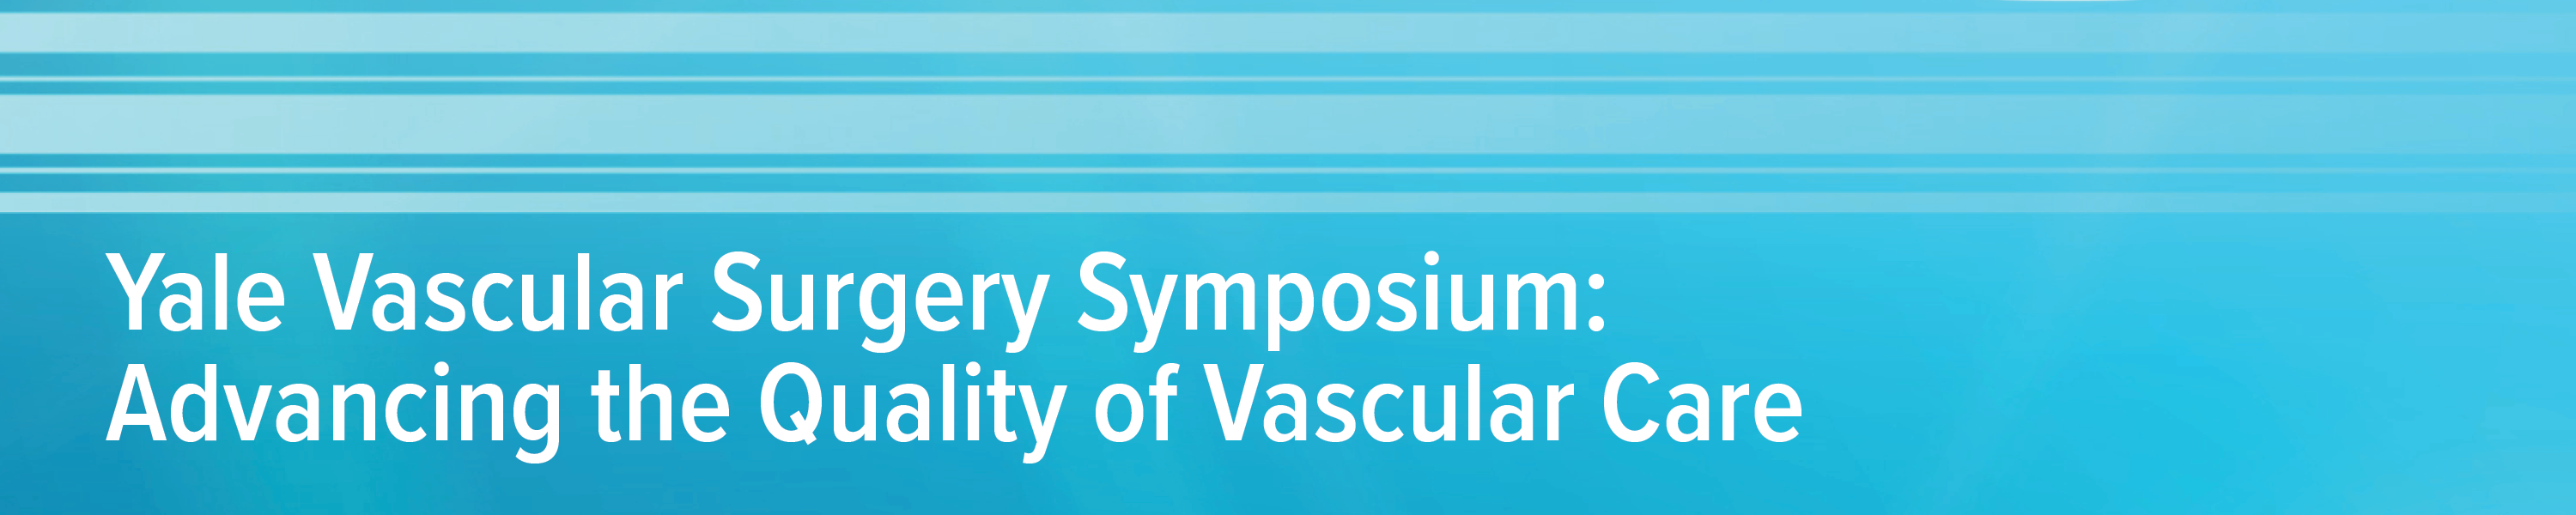 Yale Vascular Surgery Symposium: Advancing the Quality of Vascular Care Banner